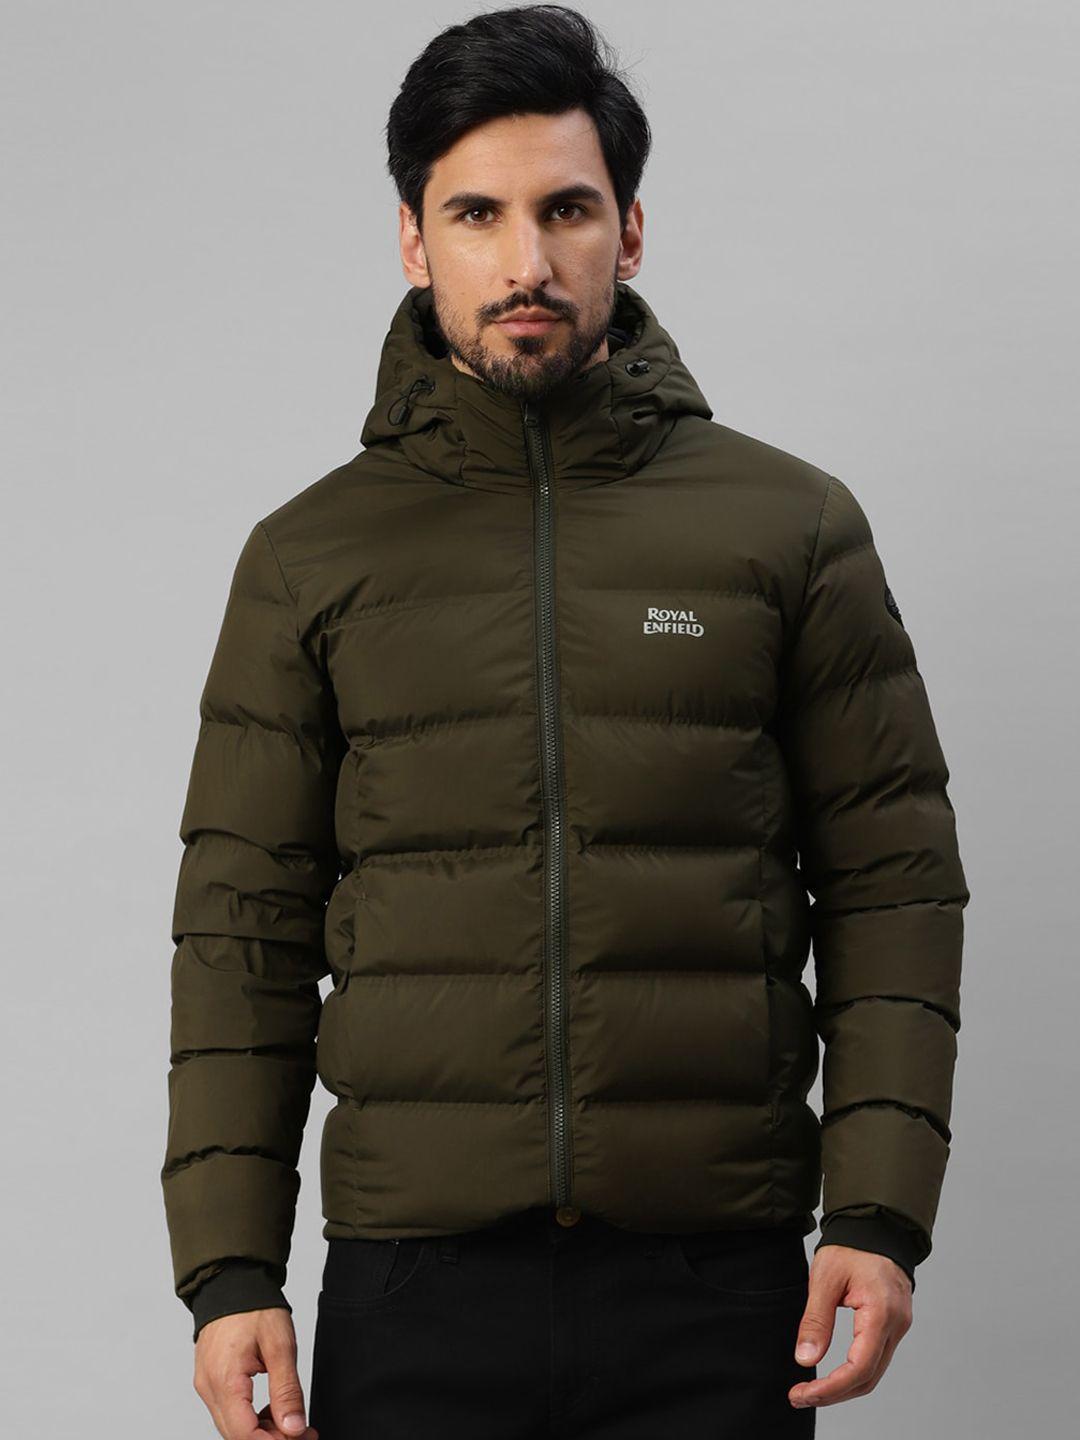 royal enfield hooded quilted jacket with zip detail